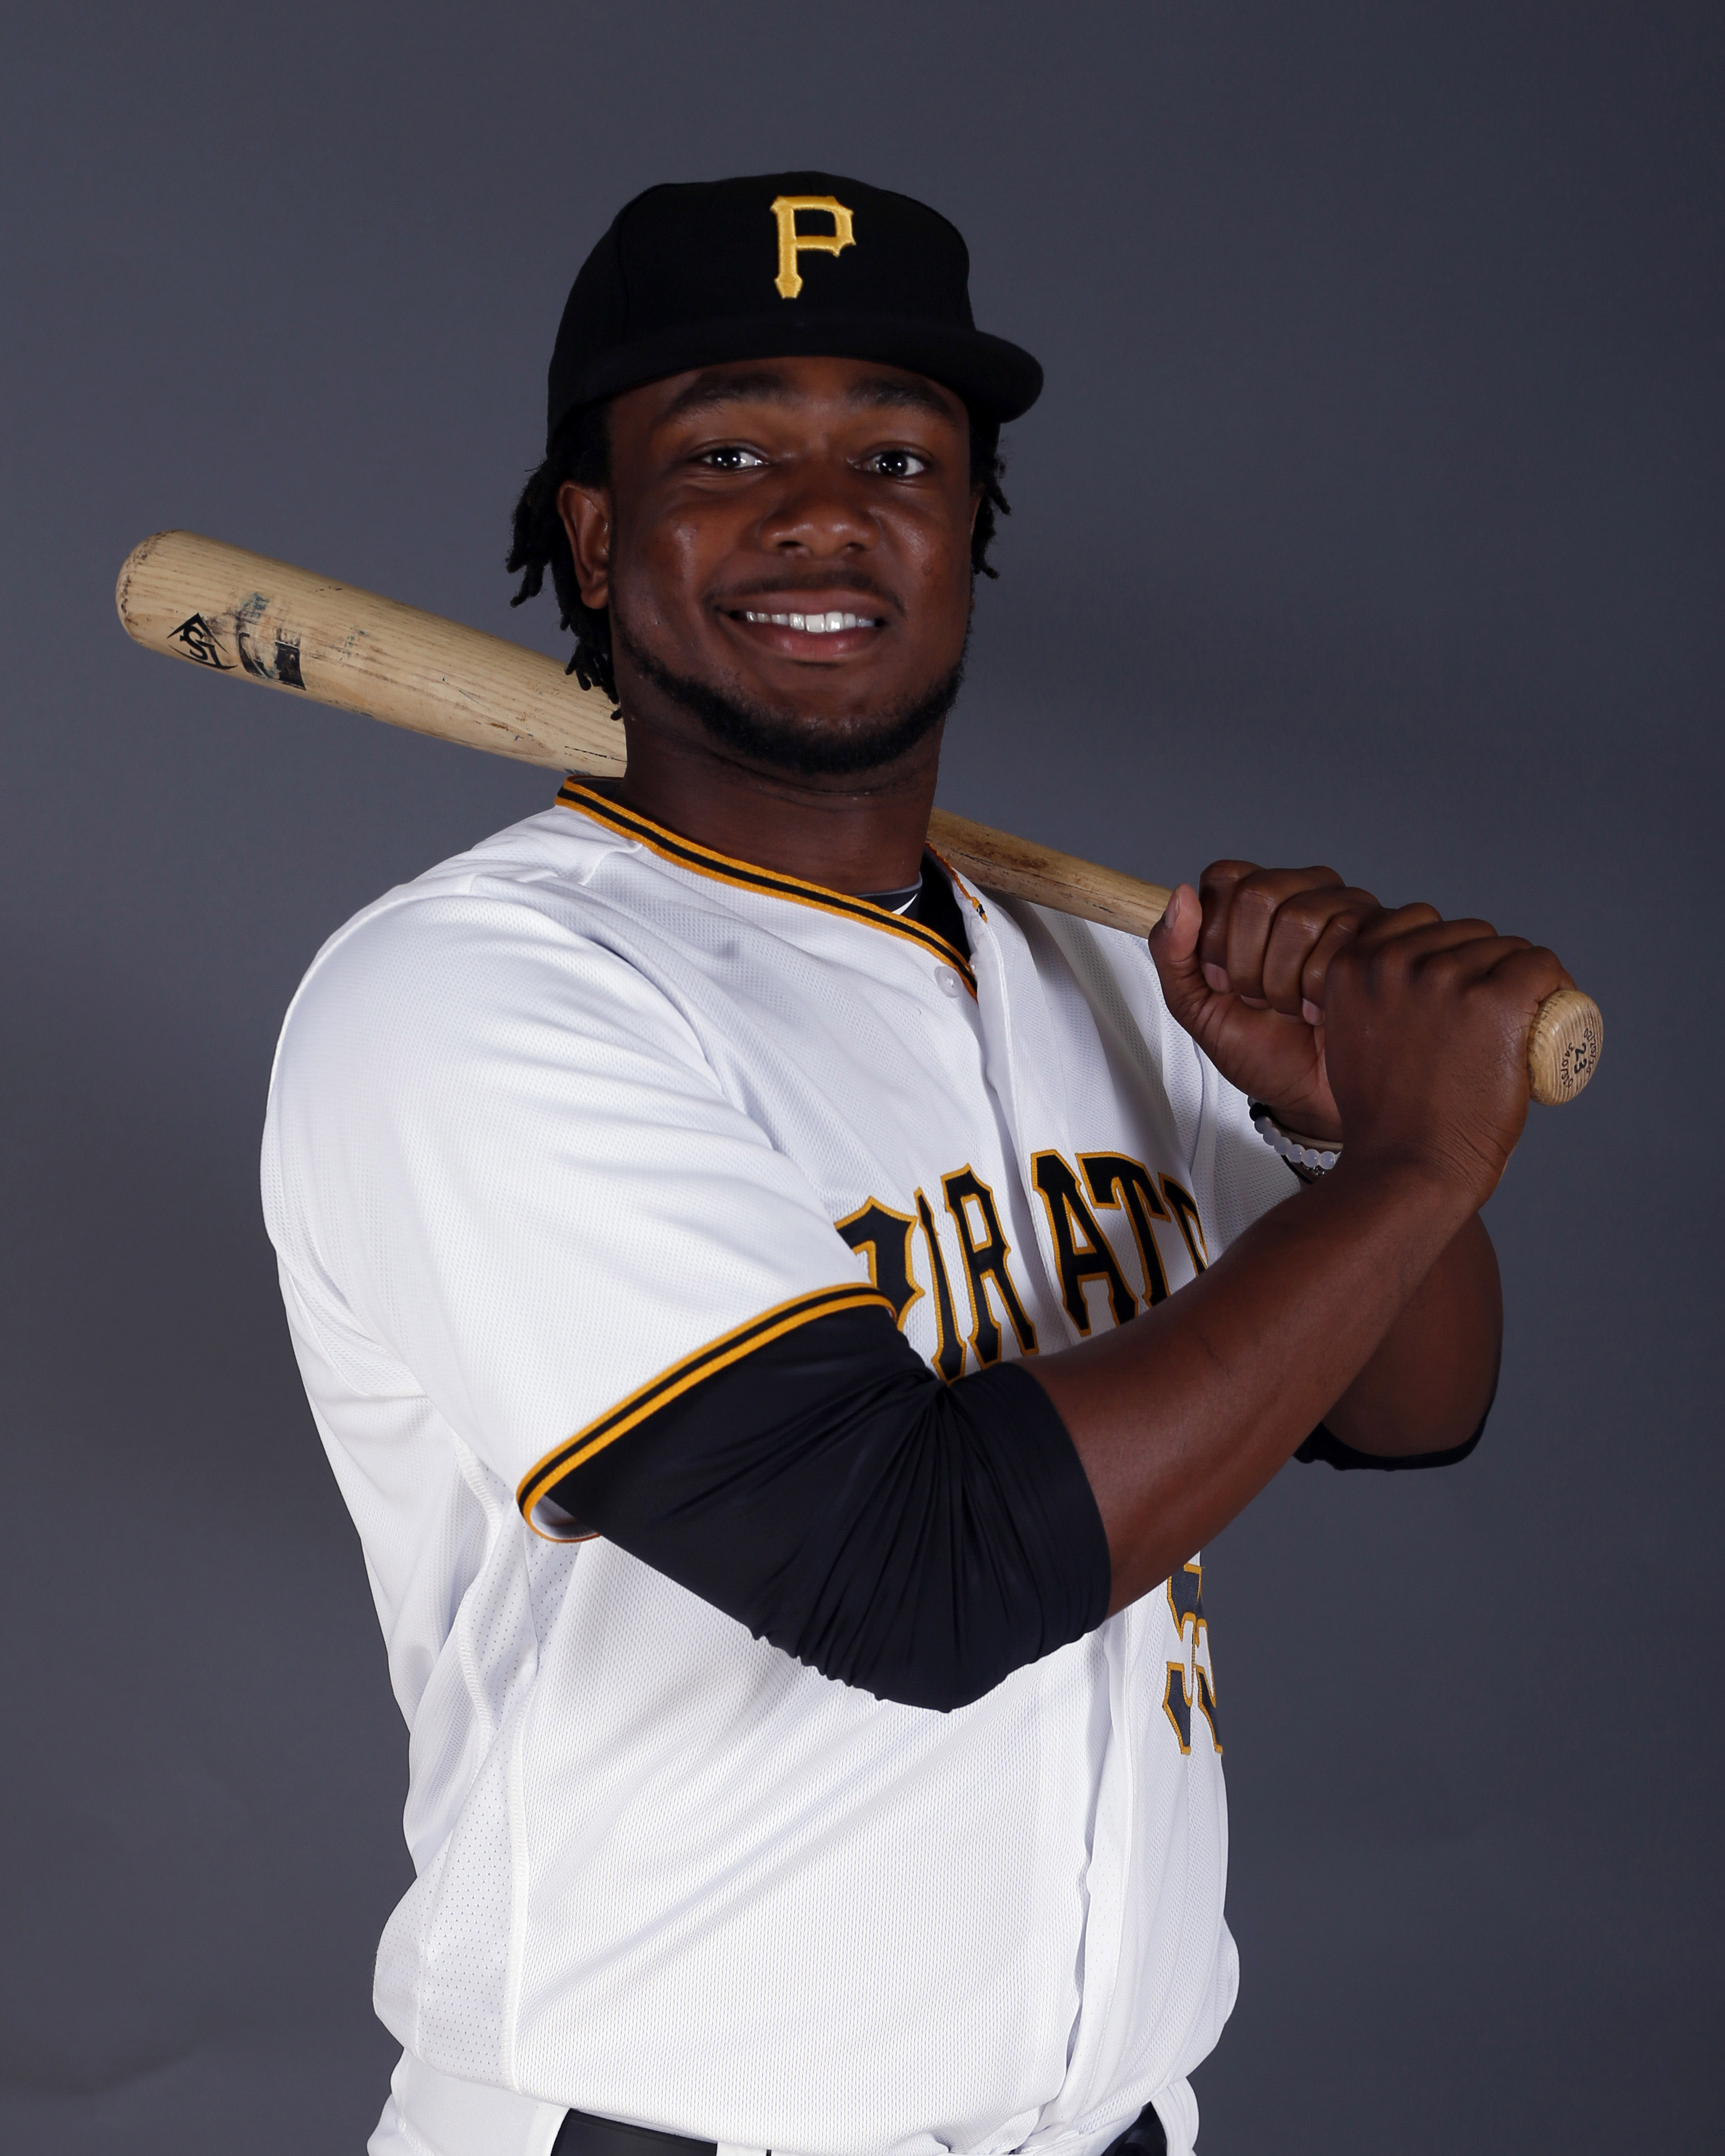 Pirates trade first baseman Josh Bell to Nationals 